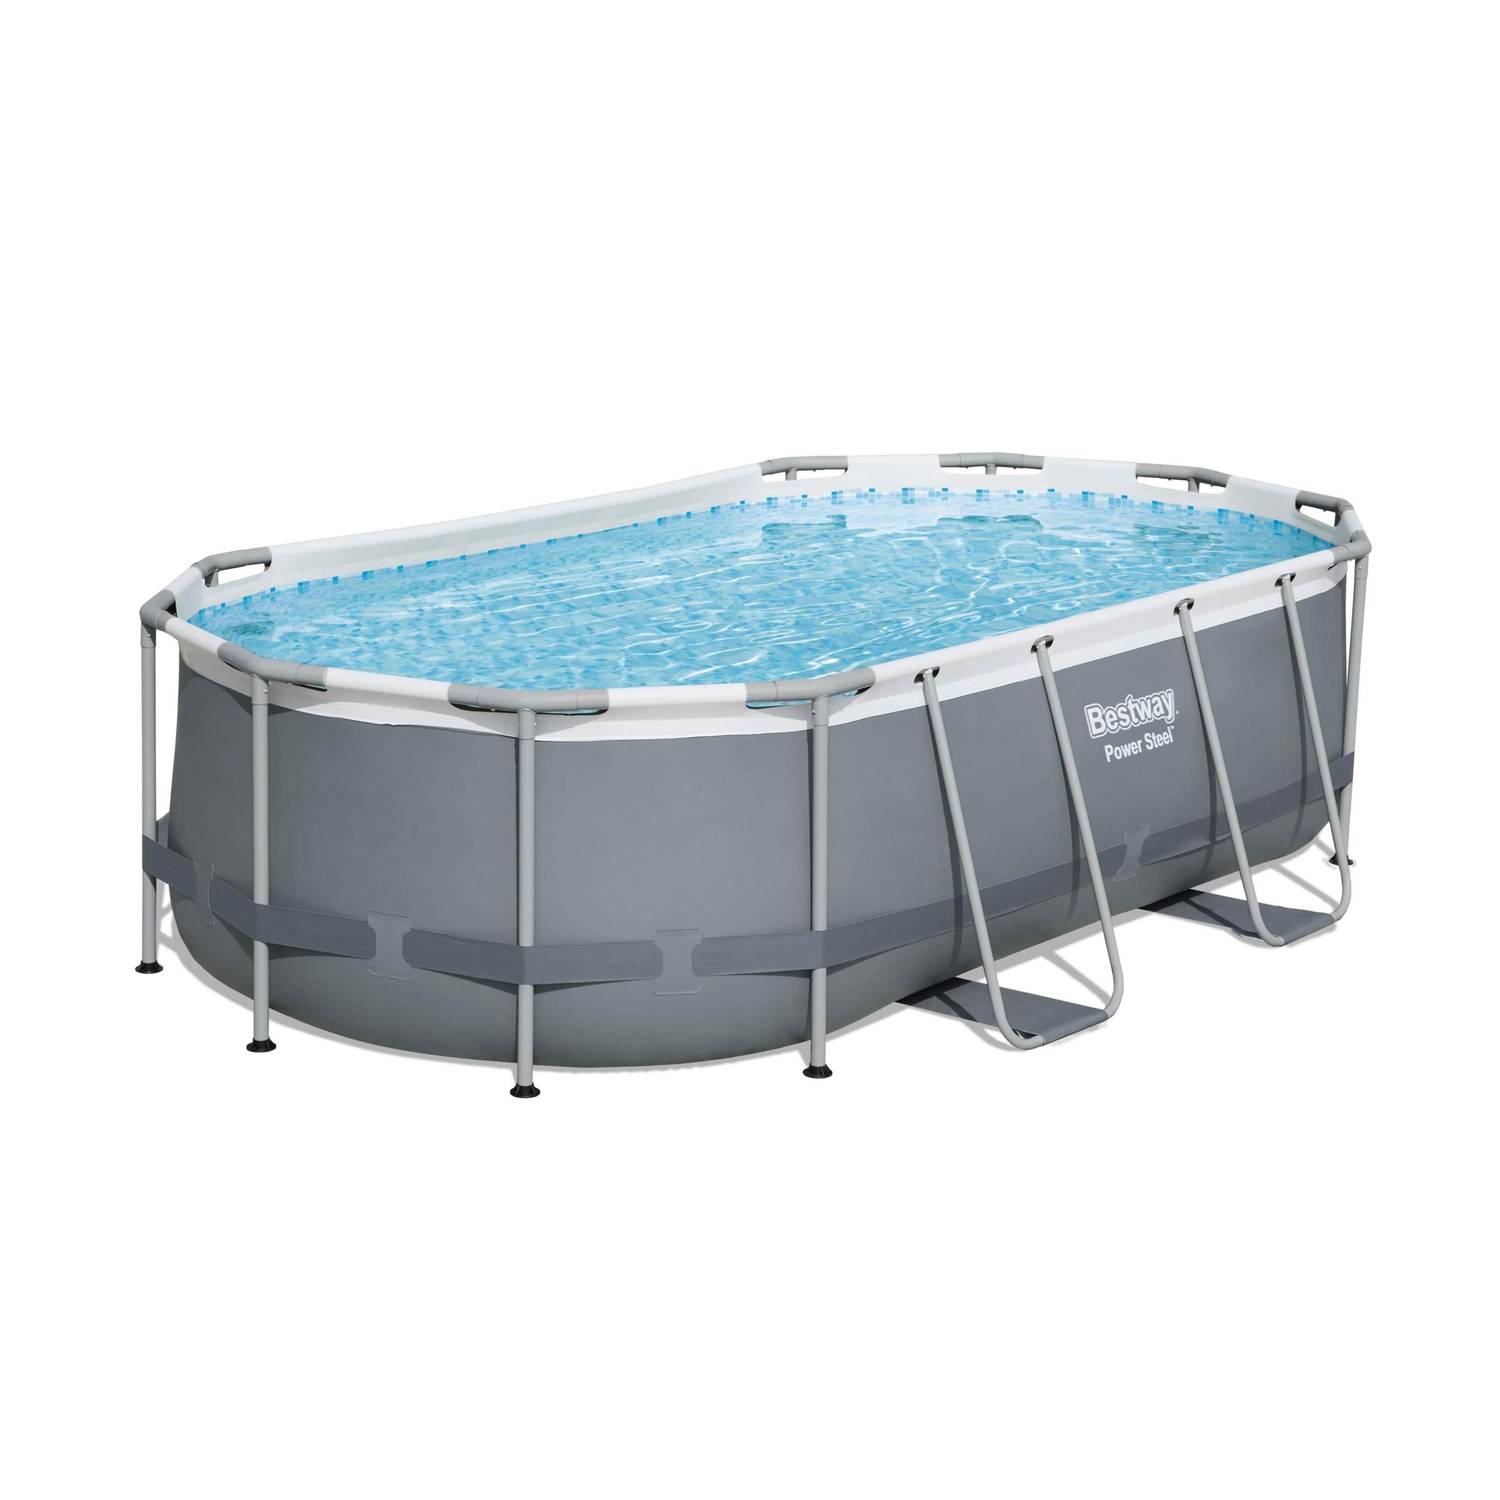 4x2m above ground tubular swimming pool, grey, oval, with pump, filter cartridge, diffuser and ladder - Bestway Spinelle - Grey Photo1